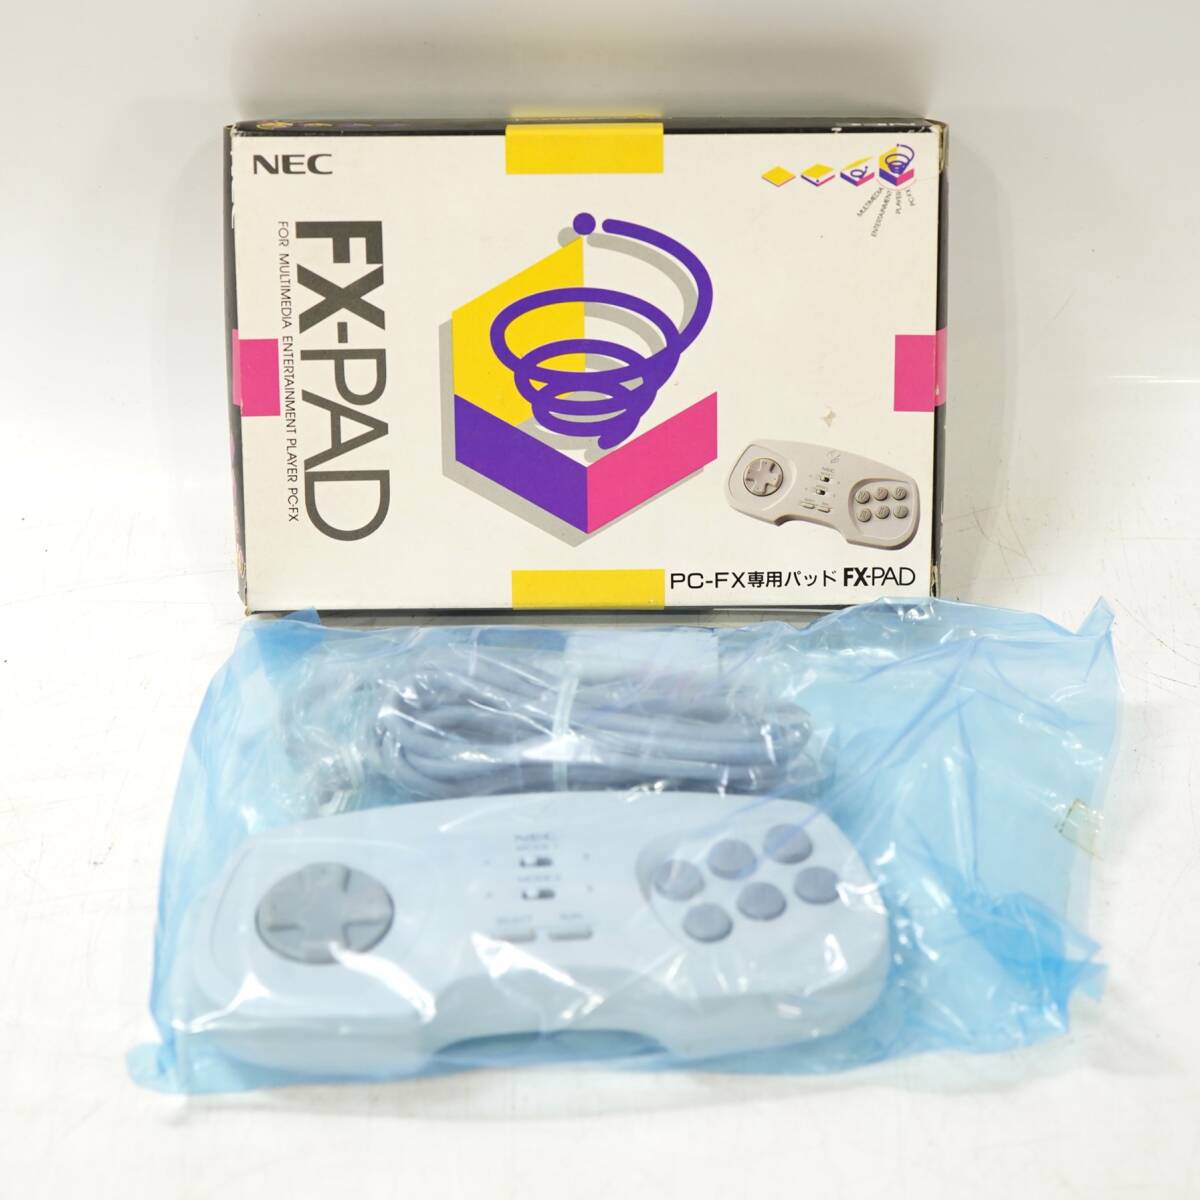  rare unused dead stock NEC PC-FX exclusive use pad FX-PAD Japan electric GAME game YW180